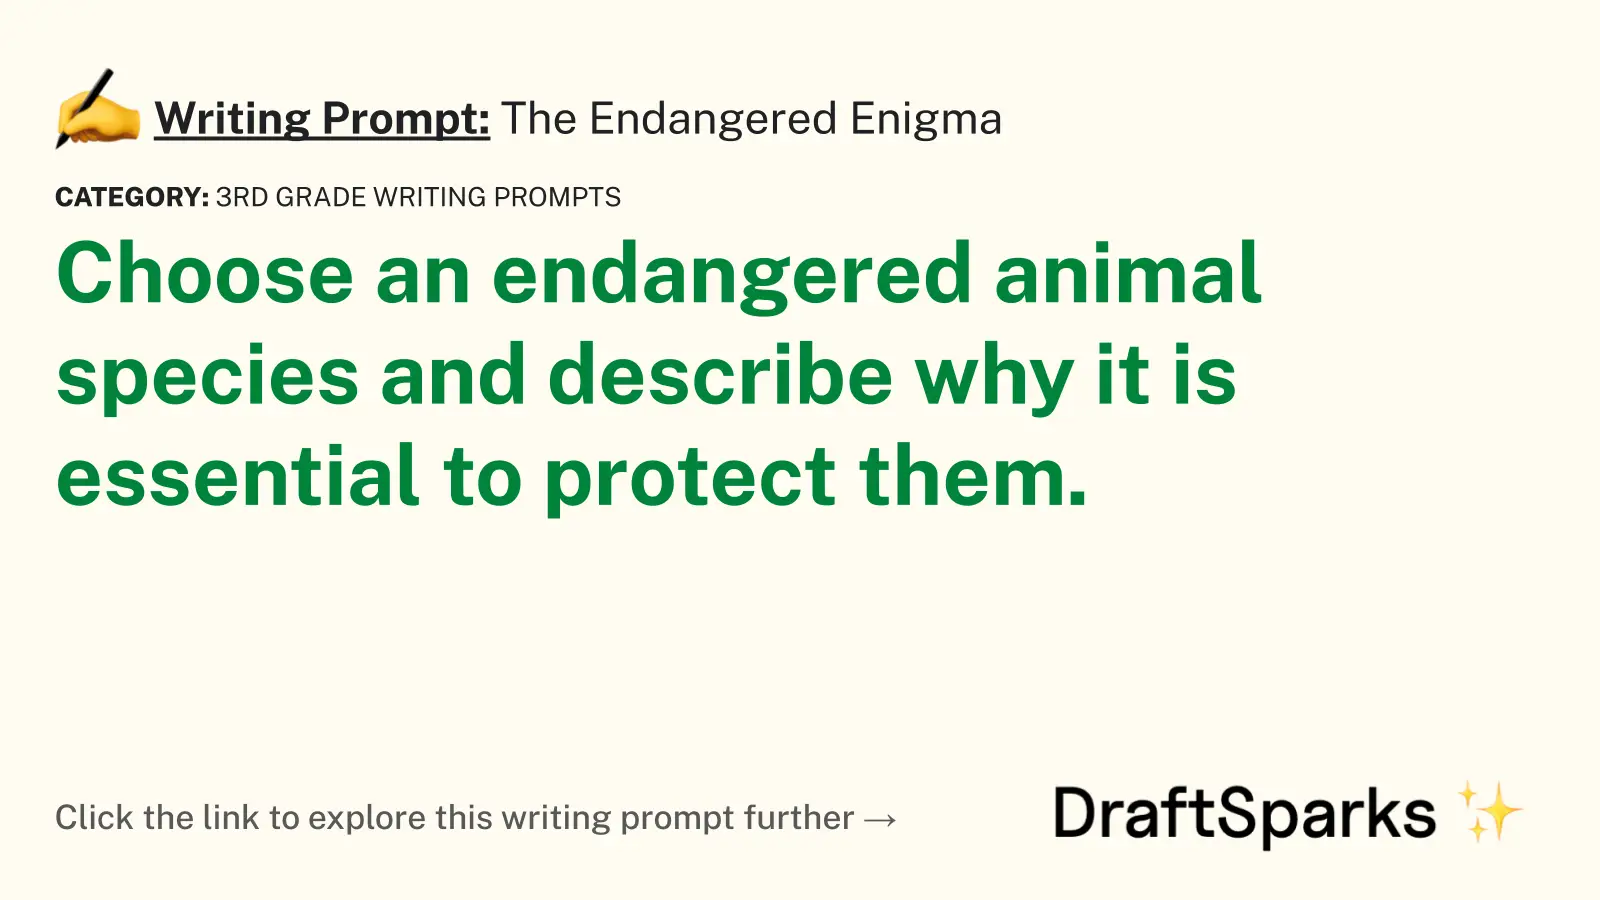 The Endangered Enigma